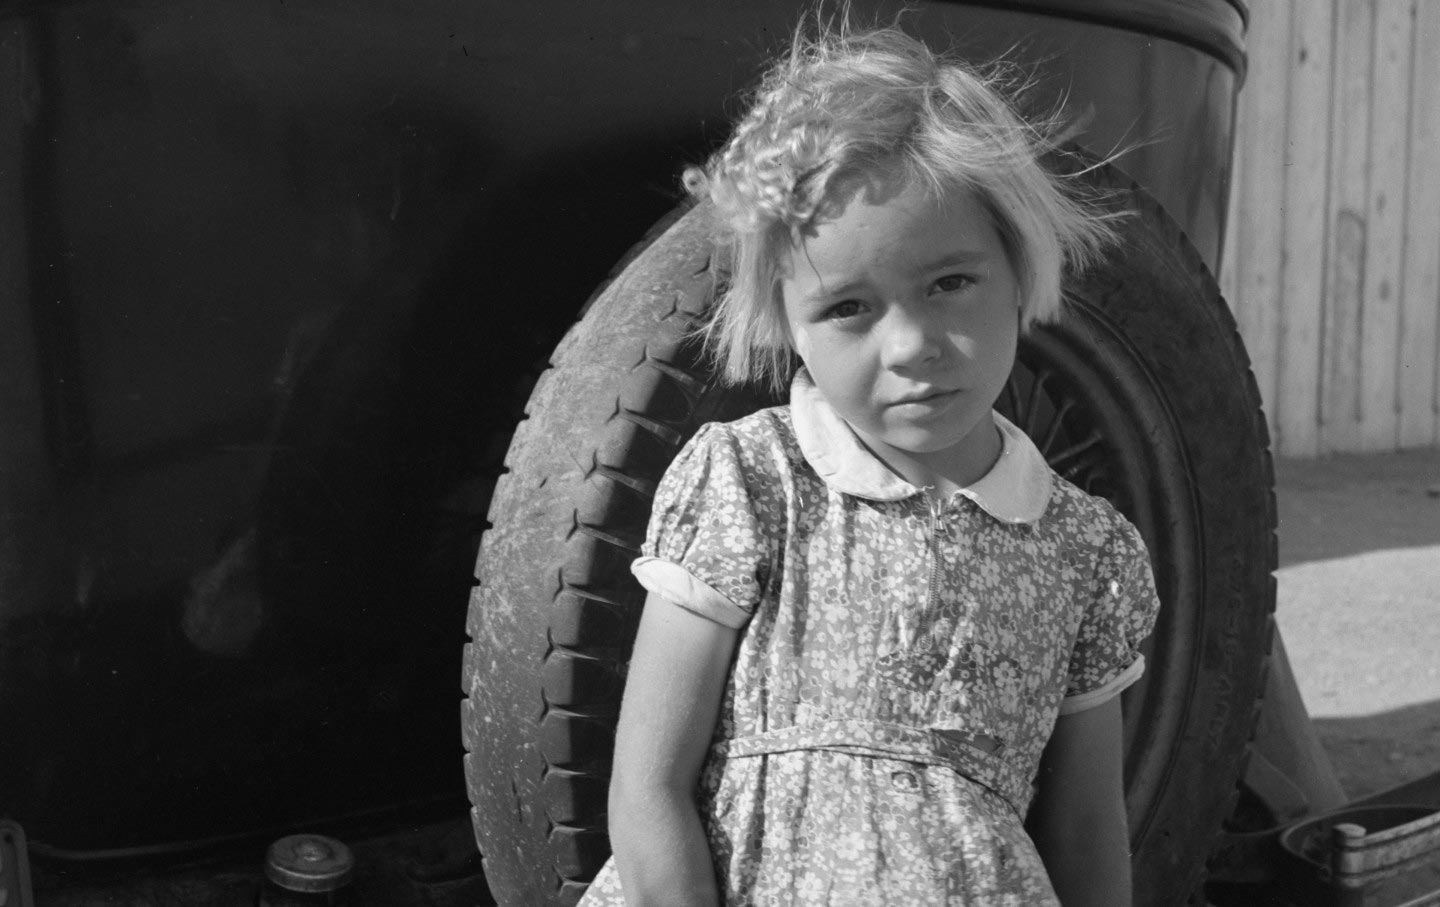 An Arkansas girl in migrant camp near Greenfield, Salinas Valley, Calif., 1939